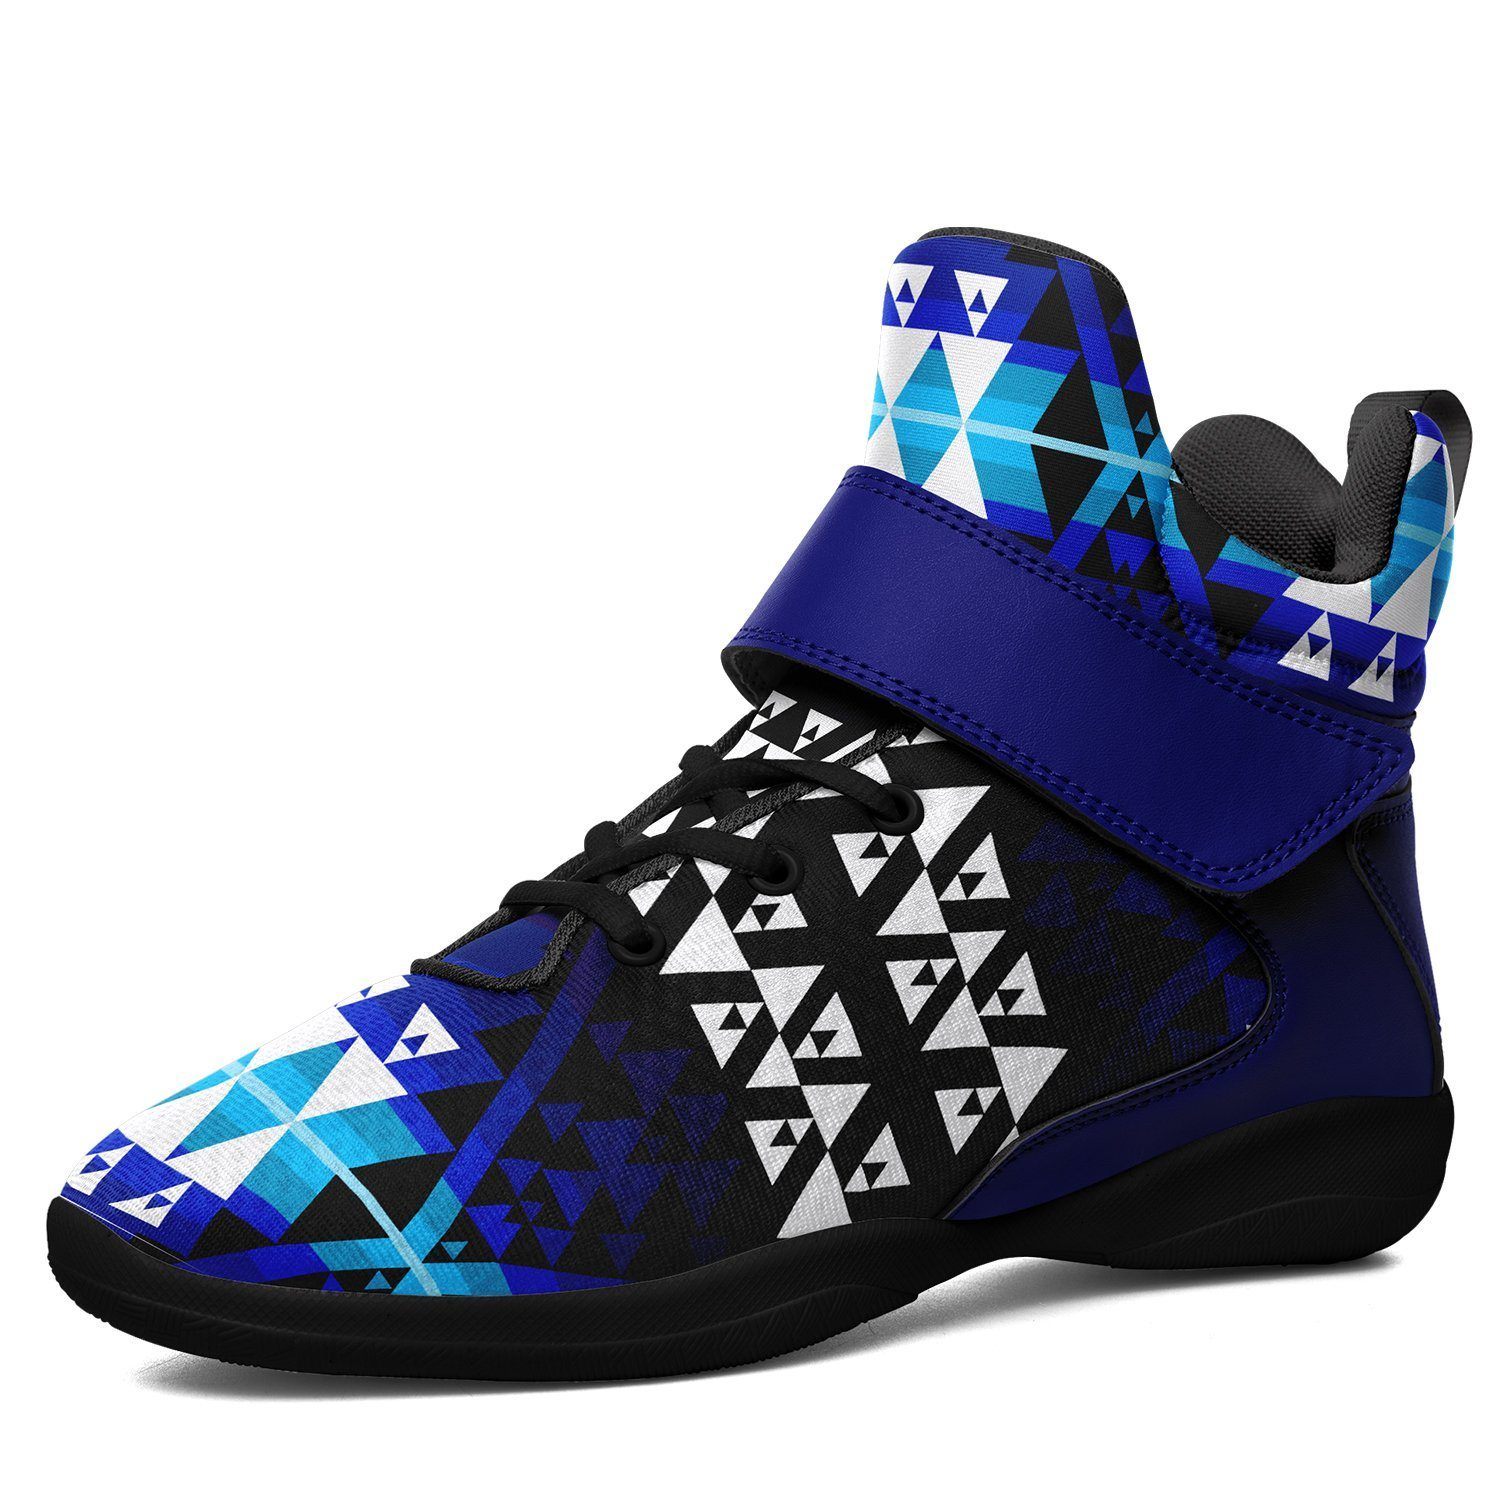 Writing on Stone Night Watch Kid's Ipottaa Basketball / Sport High Top Shoes 49 Dzine US Child 12.5 / EUR 30 Black Sole with Blue Strap 